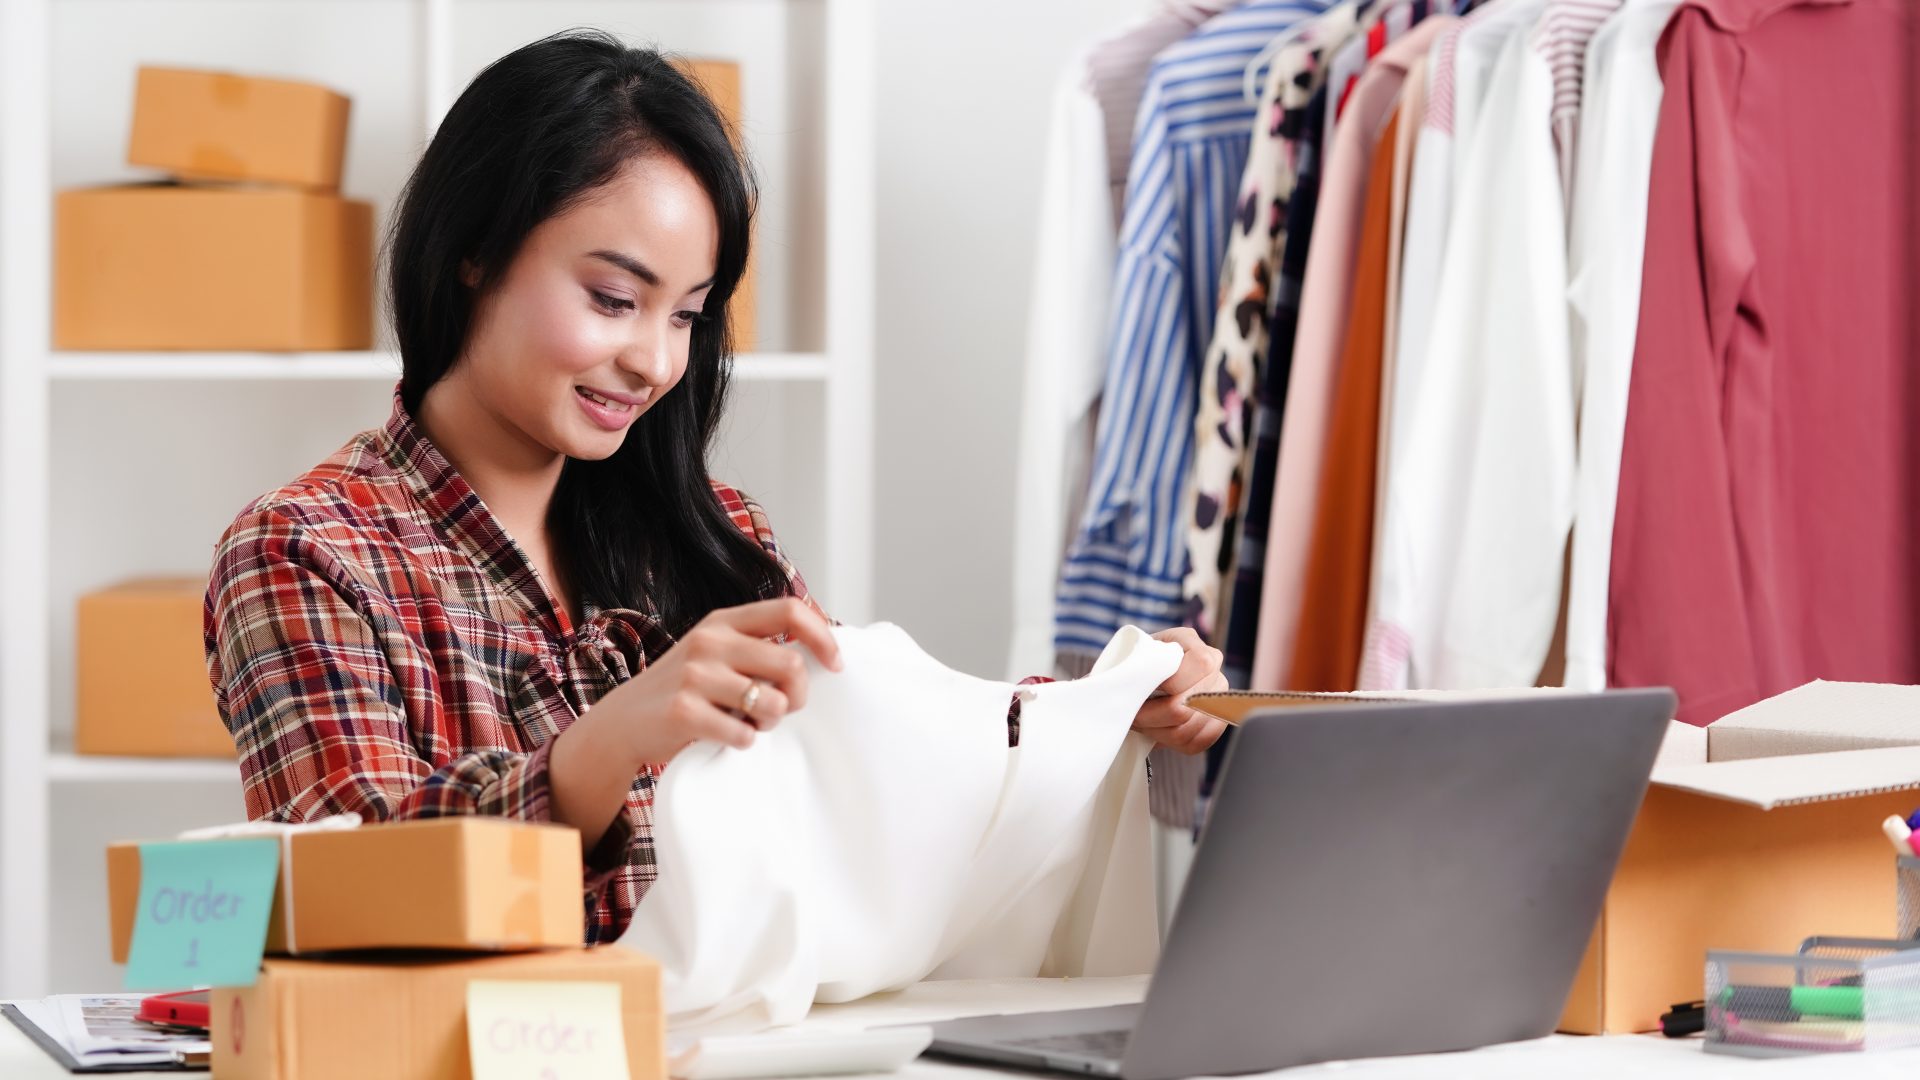 5 Best Sites to Sell Clothes Online and How to Do It - NerdWallet